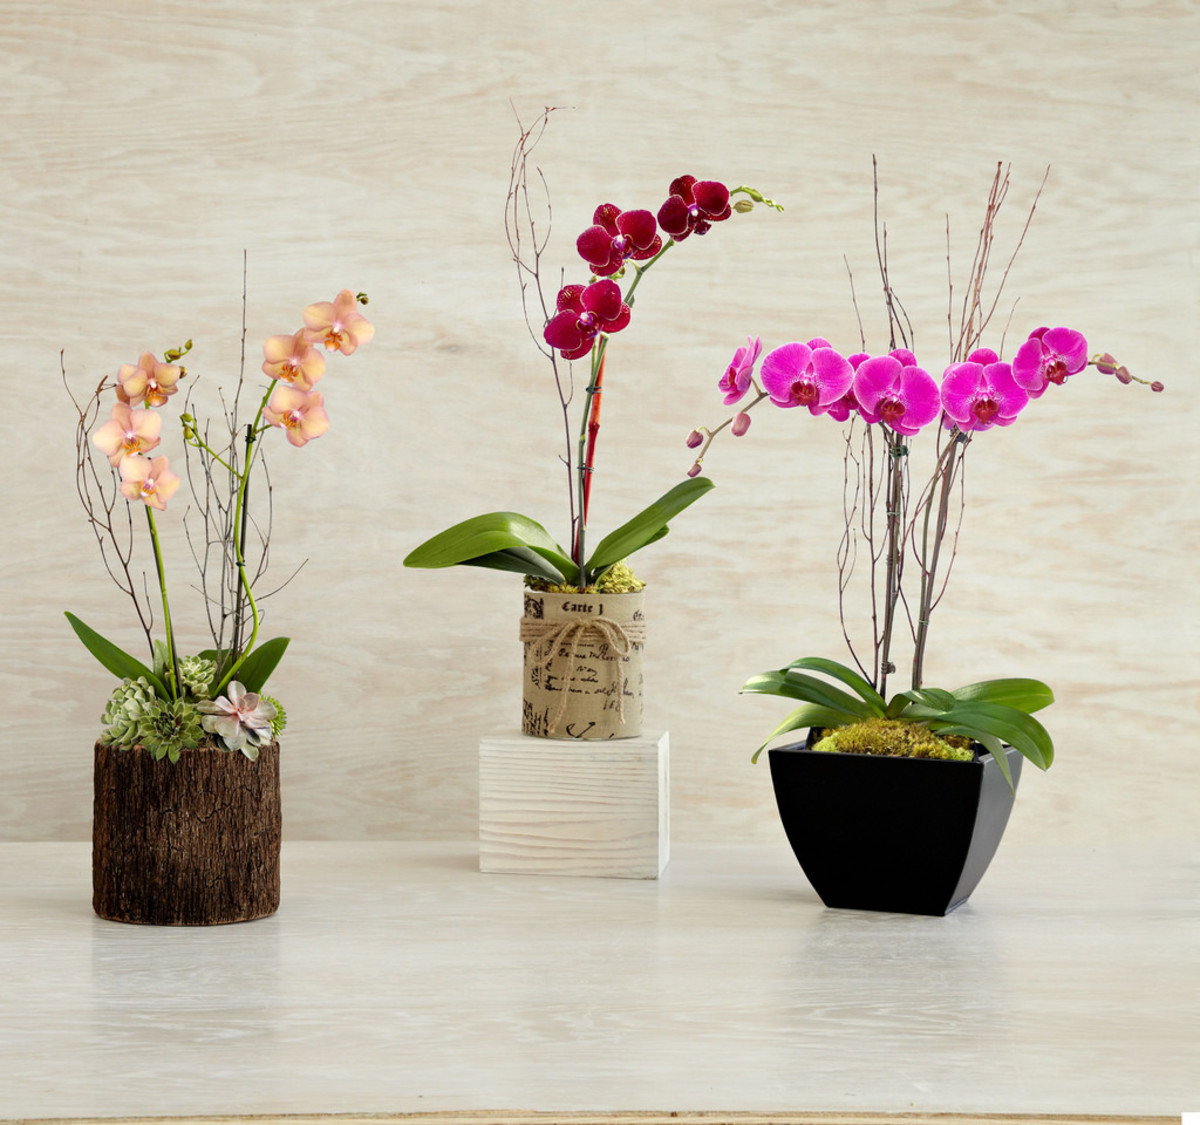 Caring for orchids can be intimidating, but it's not as hard as it seems.